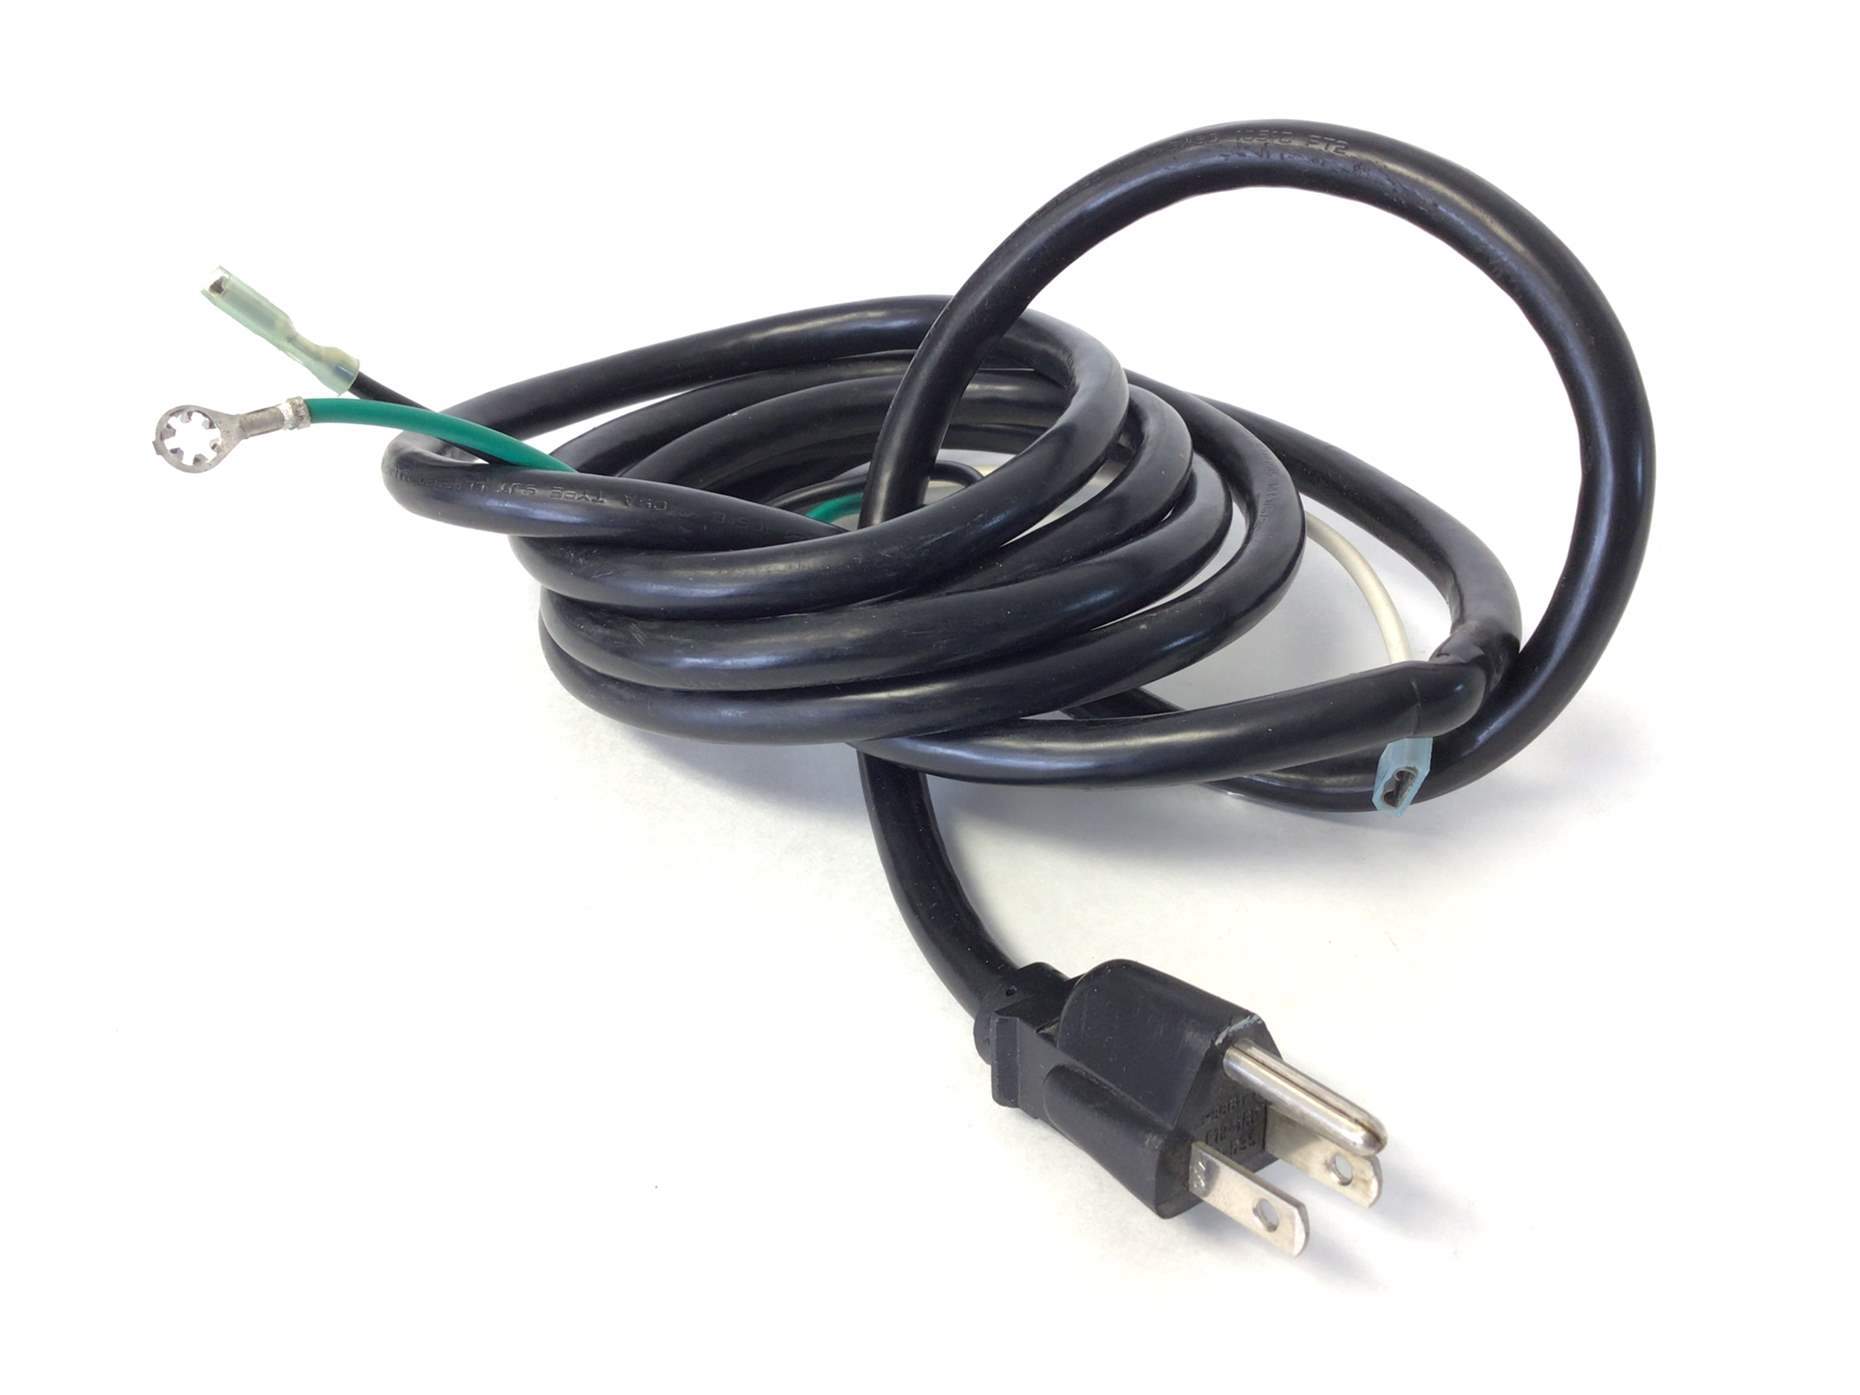 Power cord (Used)